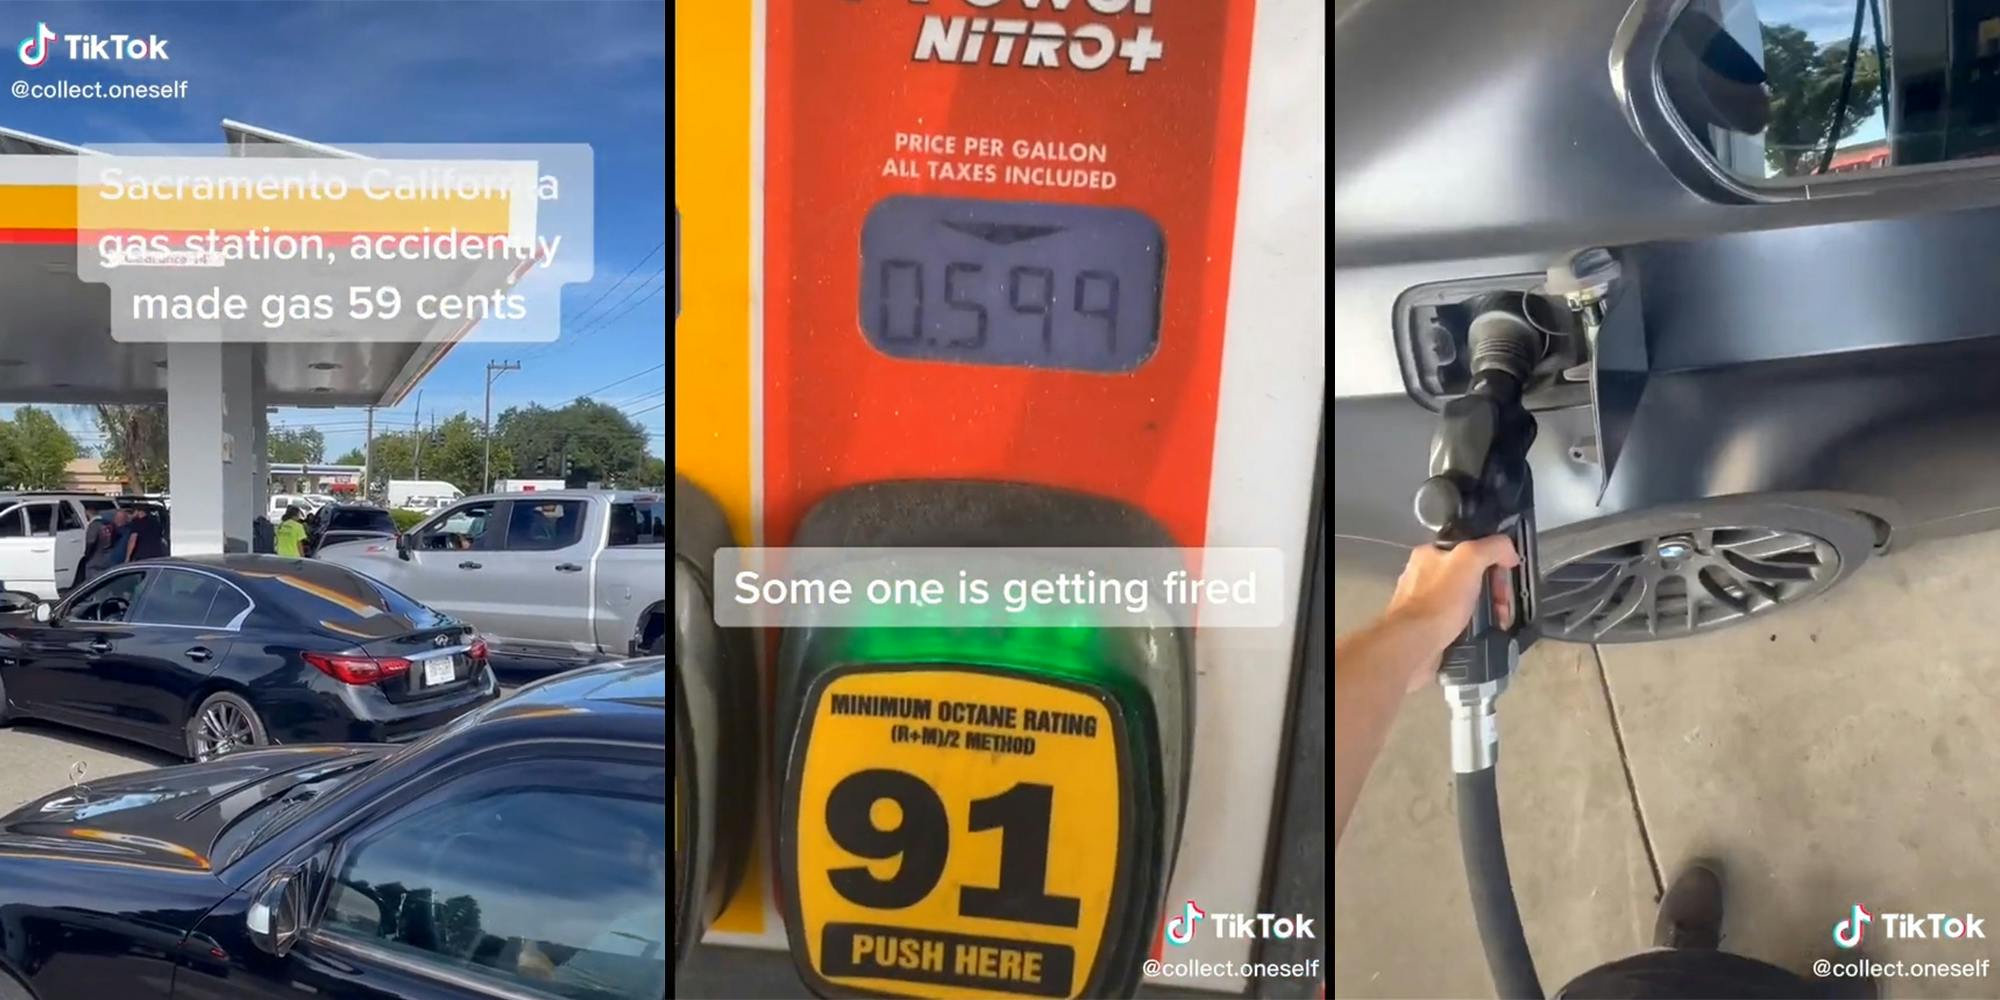 cars packed into gas station with caption "sacramento california gas station, accidently made gas 59 cents" (l) gas pump with .59 price indicator and caption "some one is getting fired" (c) hand pumping gas into car (r)